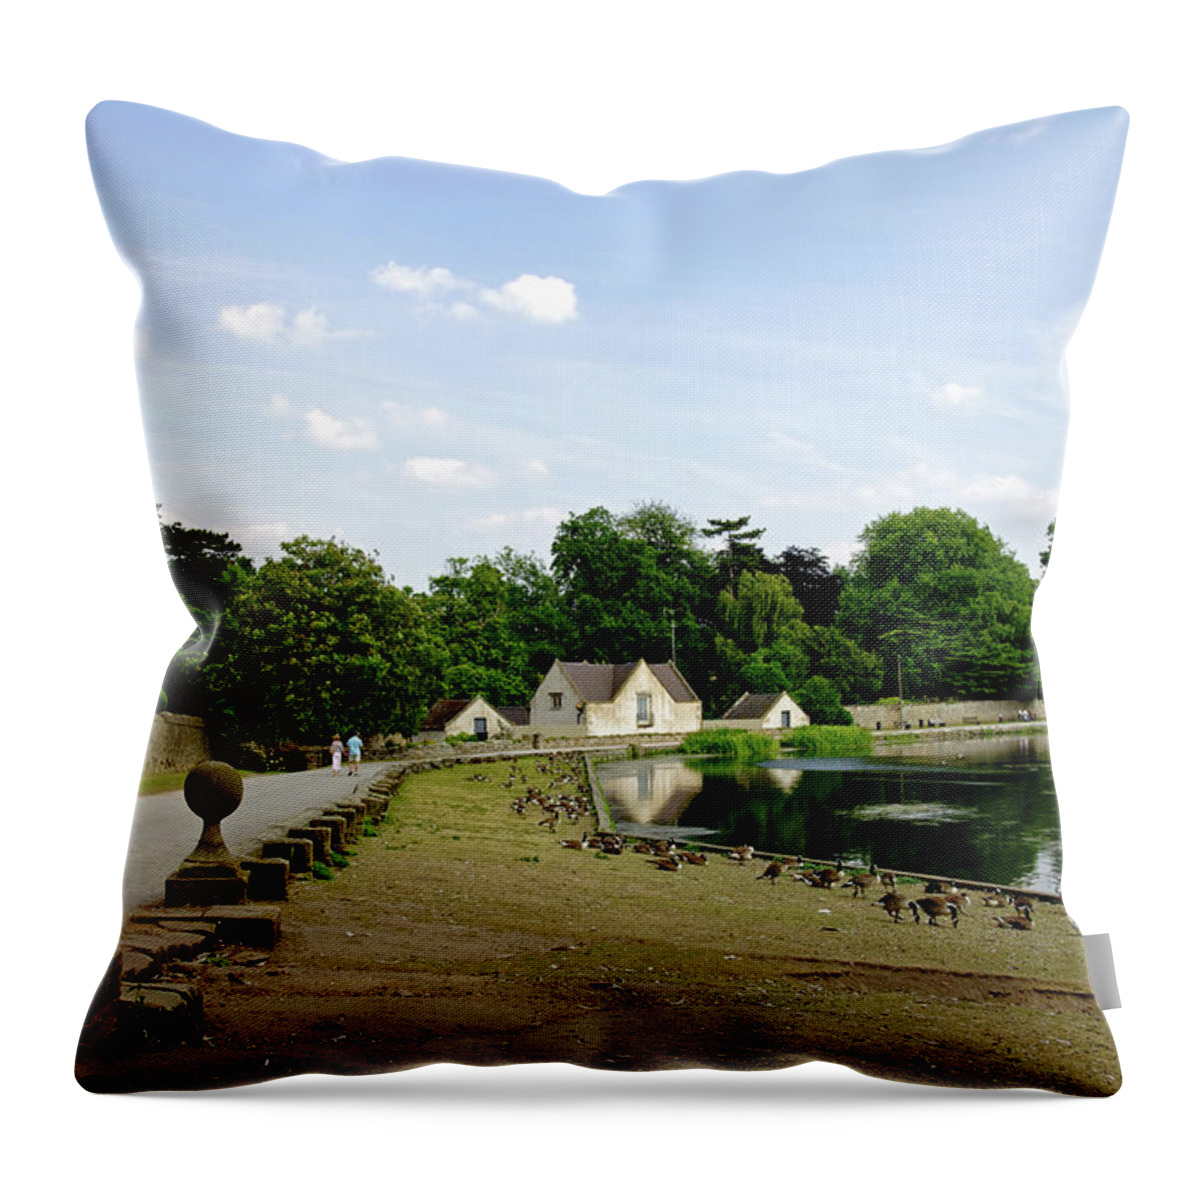 Melbourne Throw Pillow featuring the photograph Pool Road - Melbourne by Rod Johnson